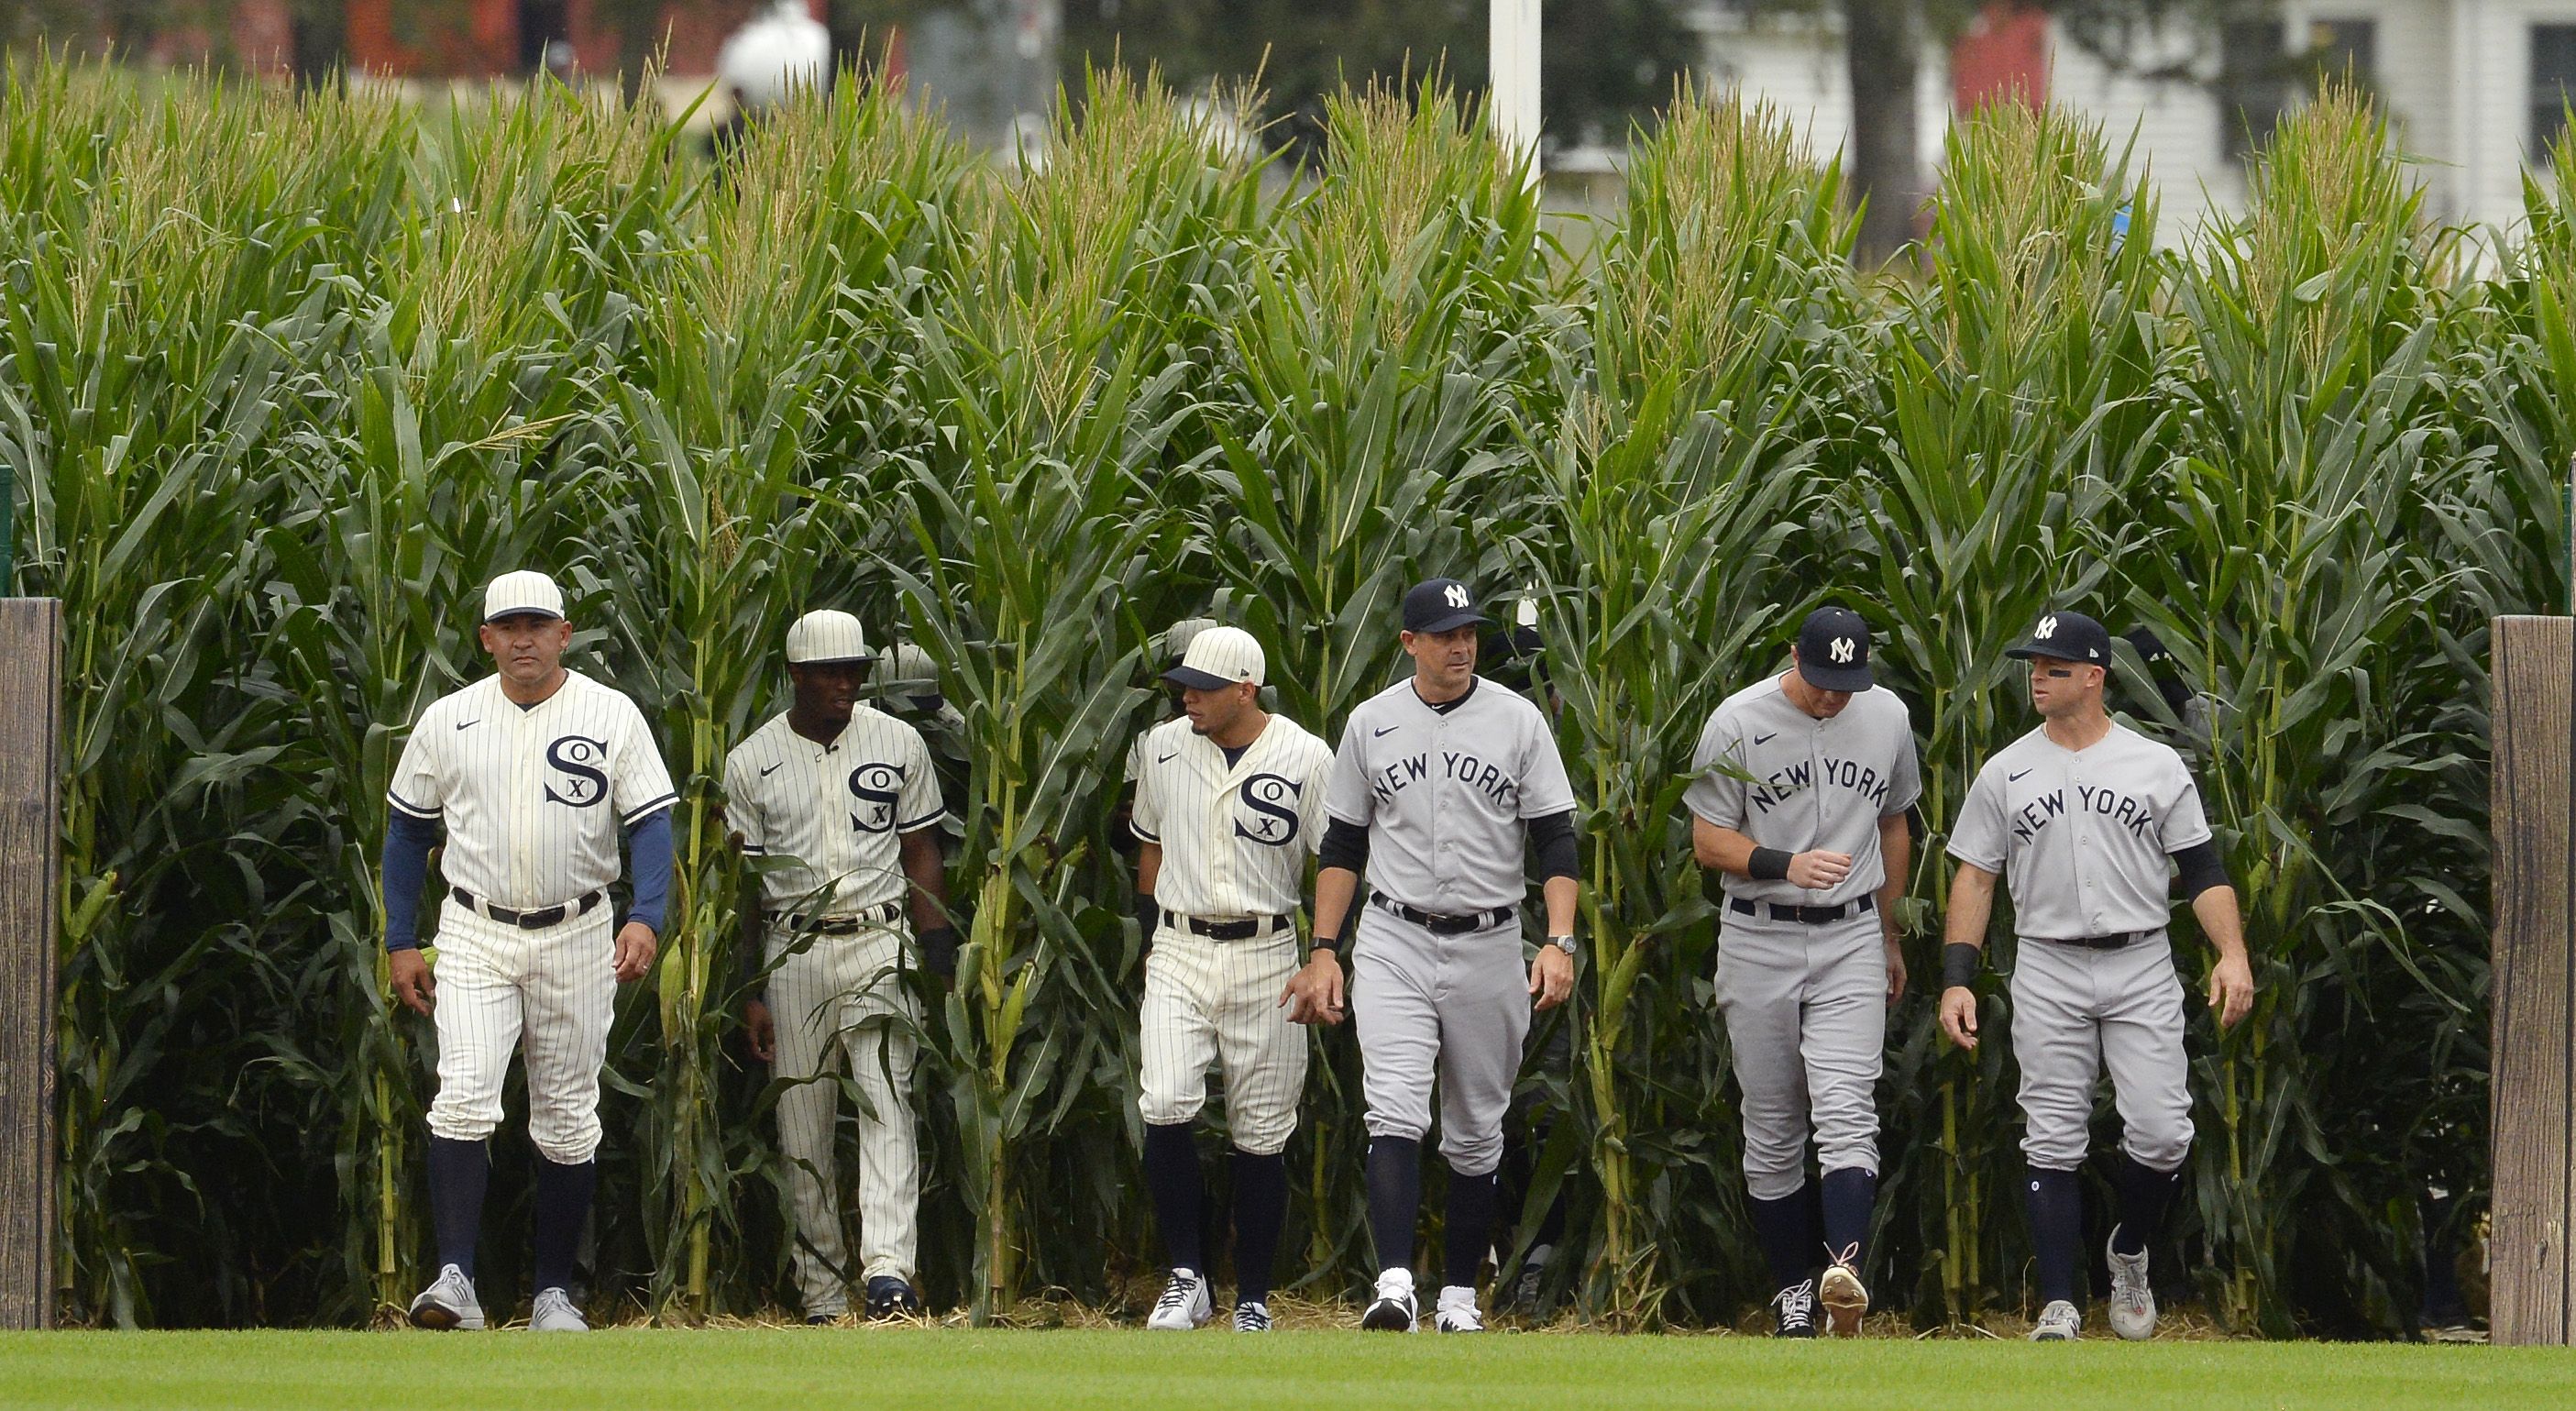 Yankees-White Sox 'Field of Dreams' Game Photos - The Best Photos